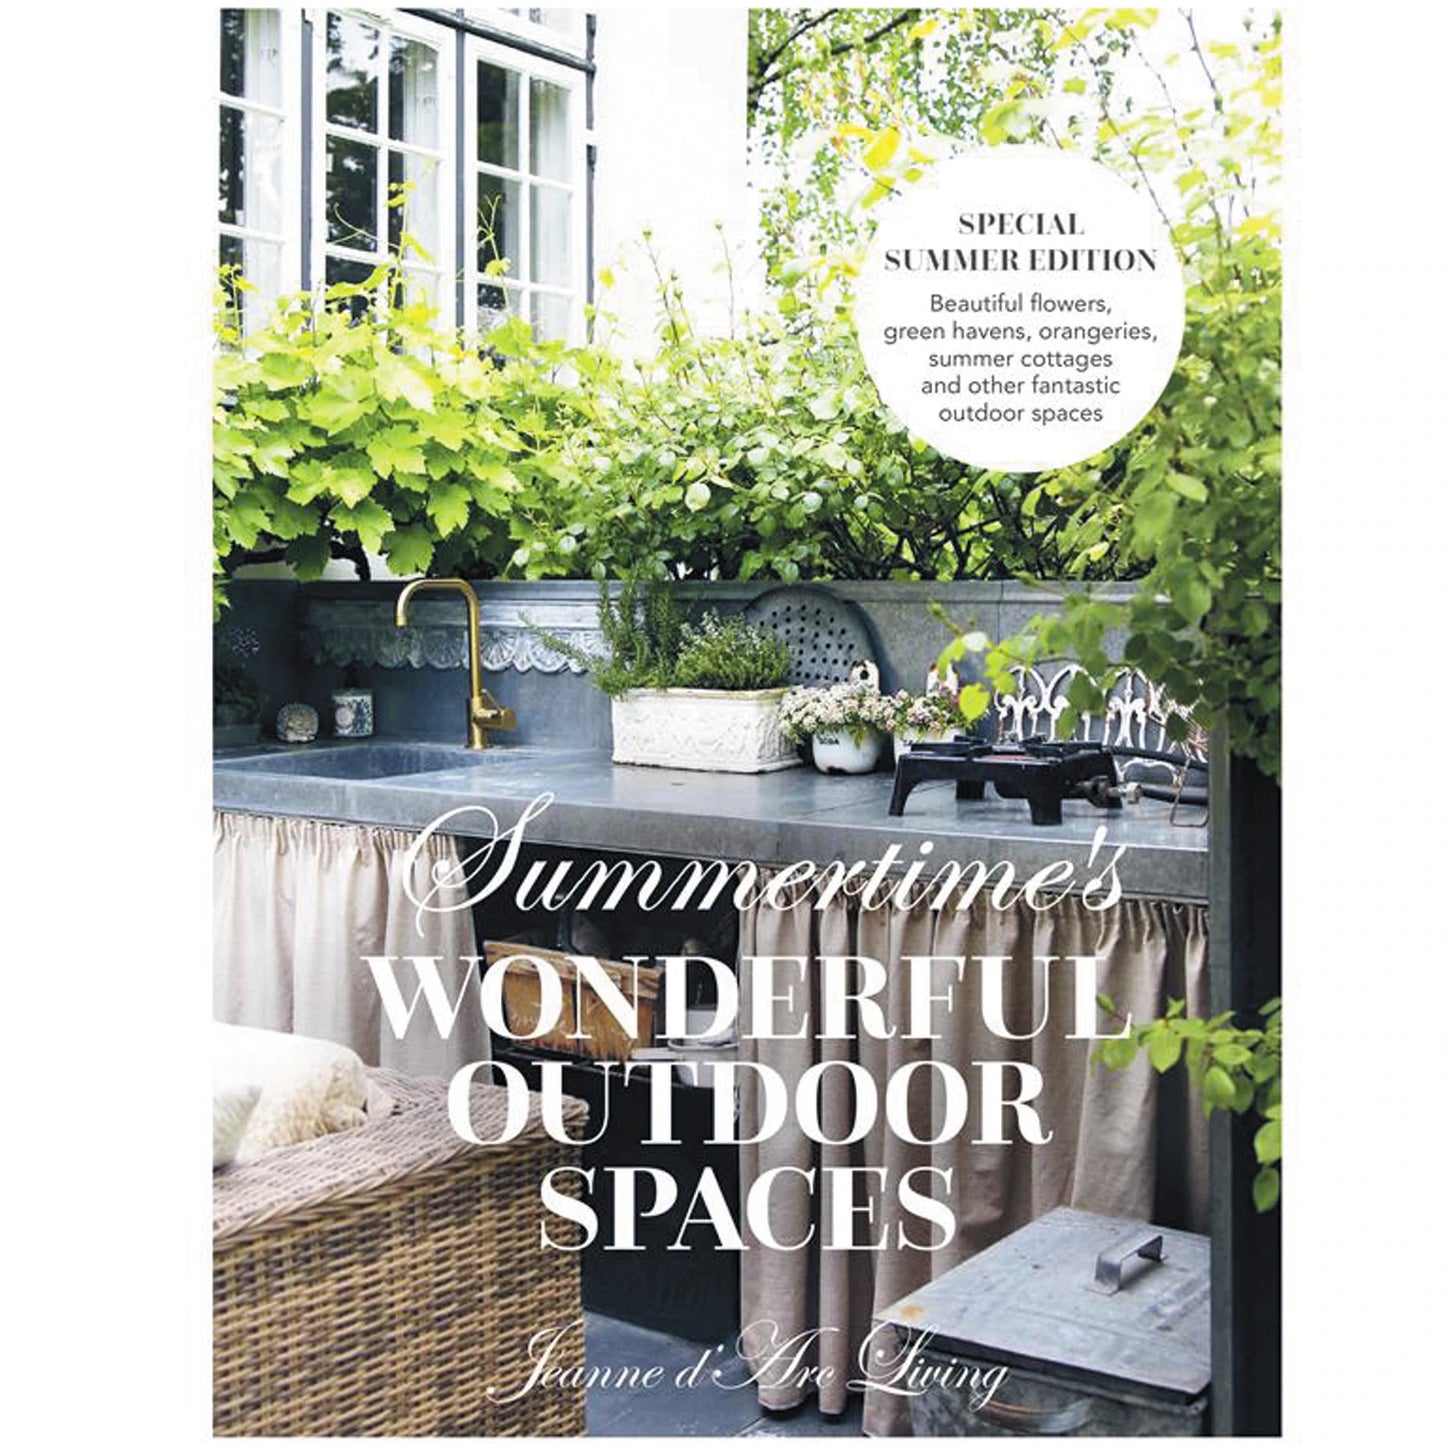 Summertime's Wonderful Outdoor Spaces - Special Edition by Jeanne d’Arc Living